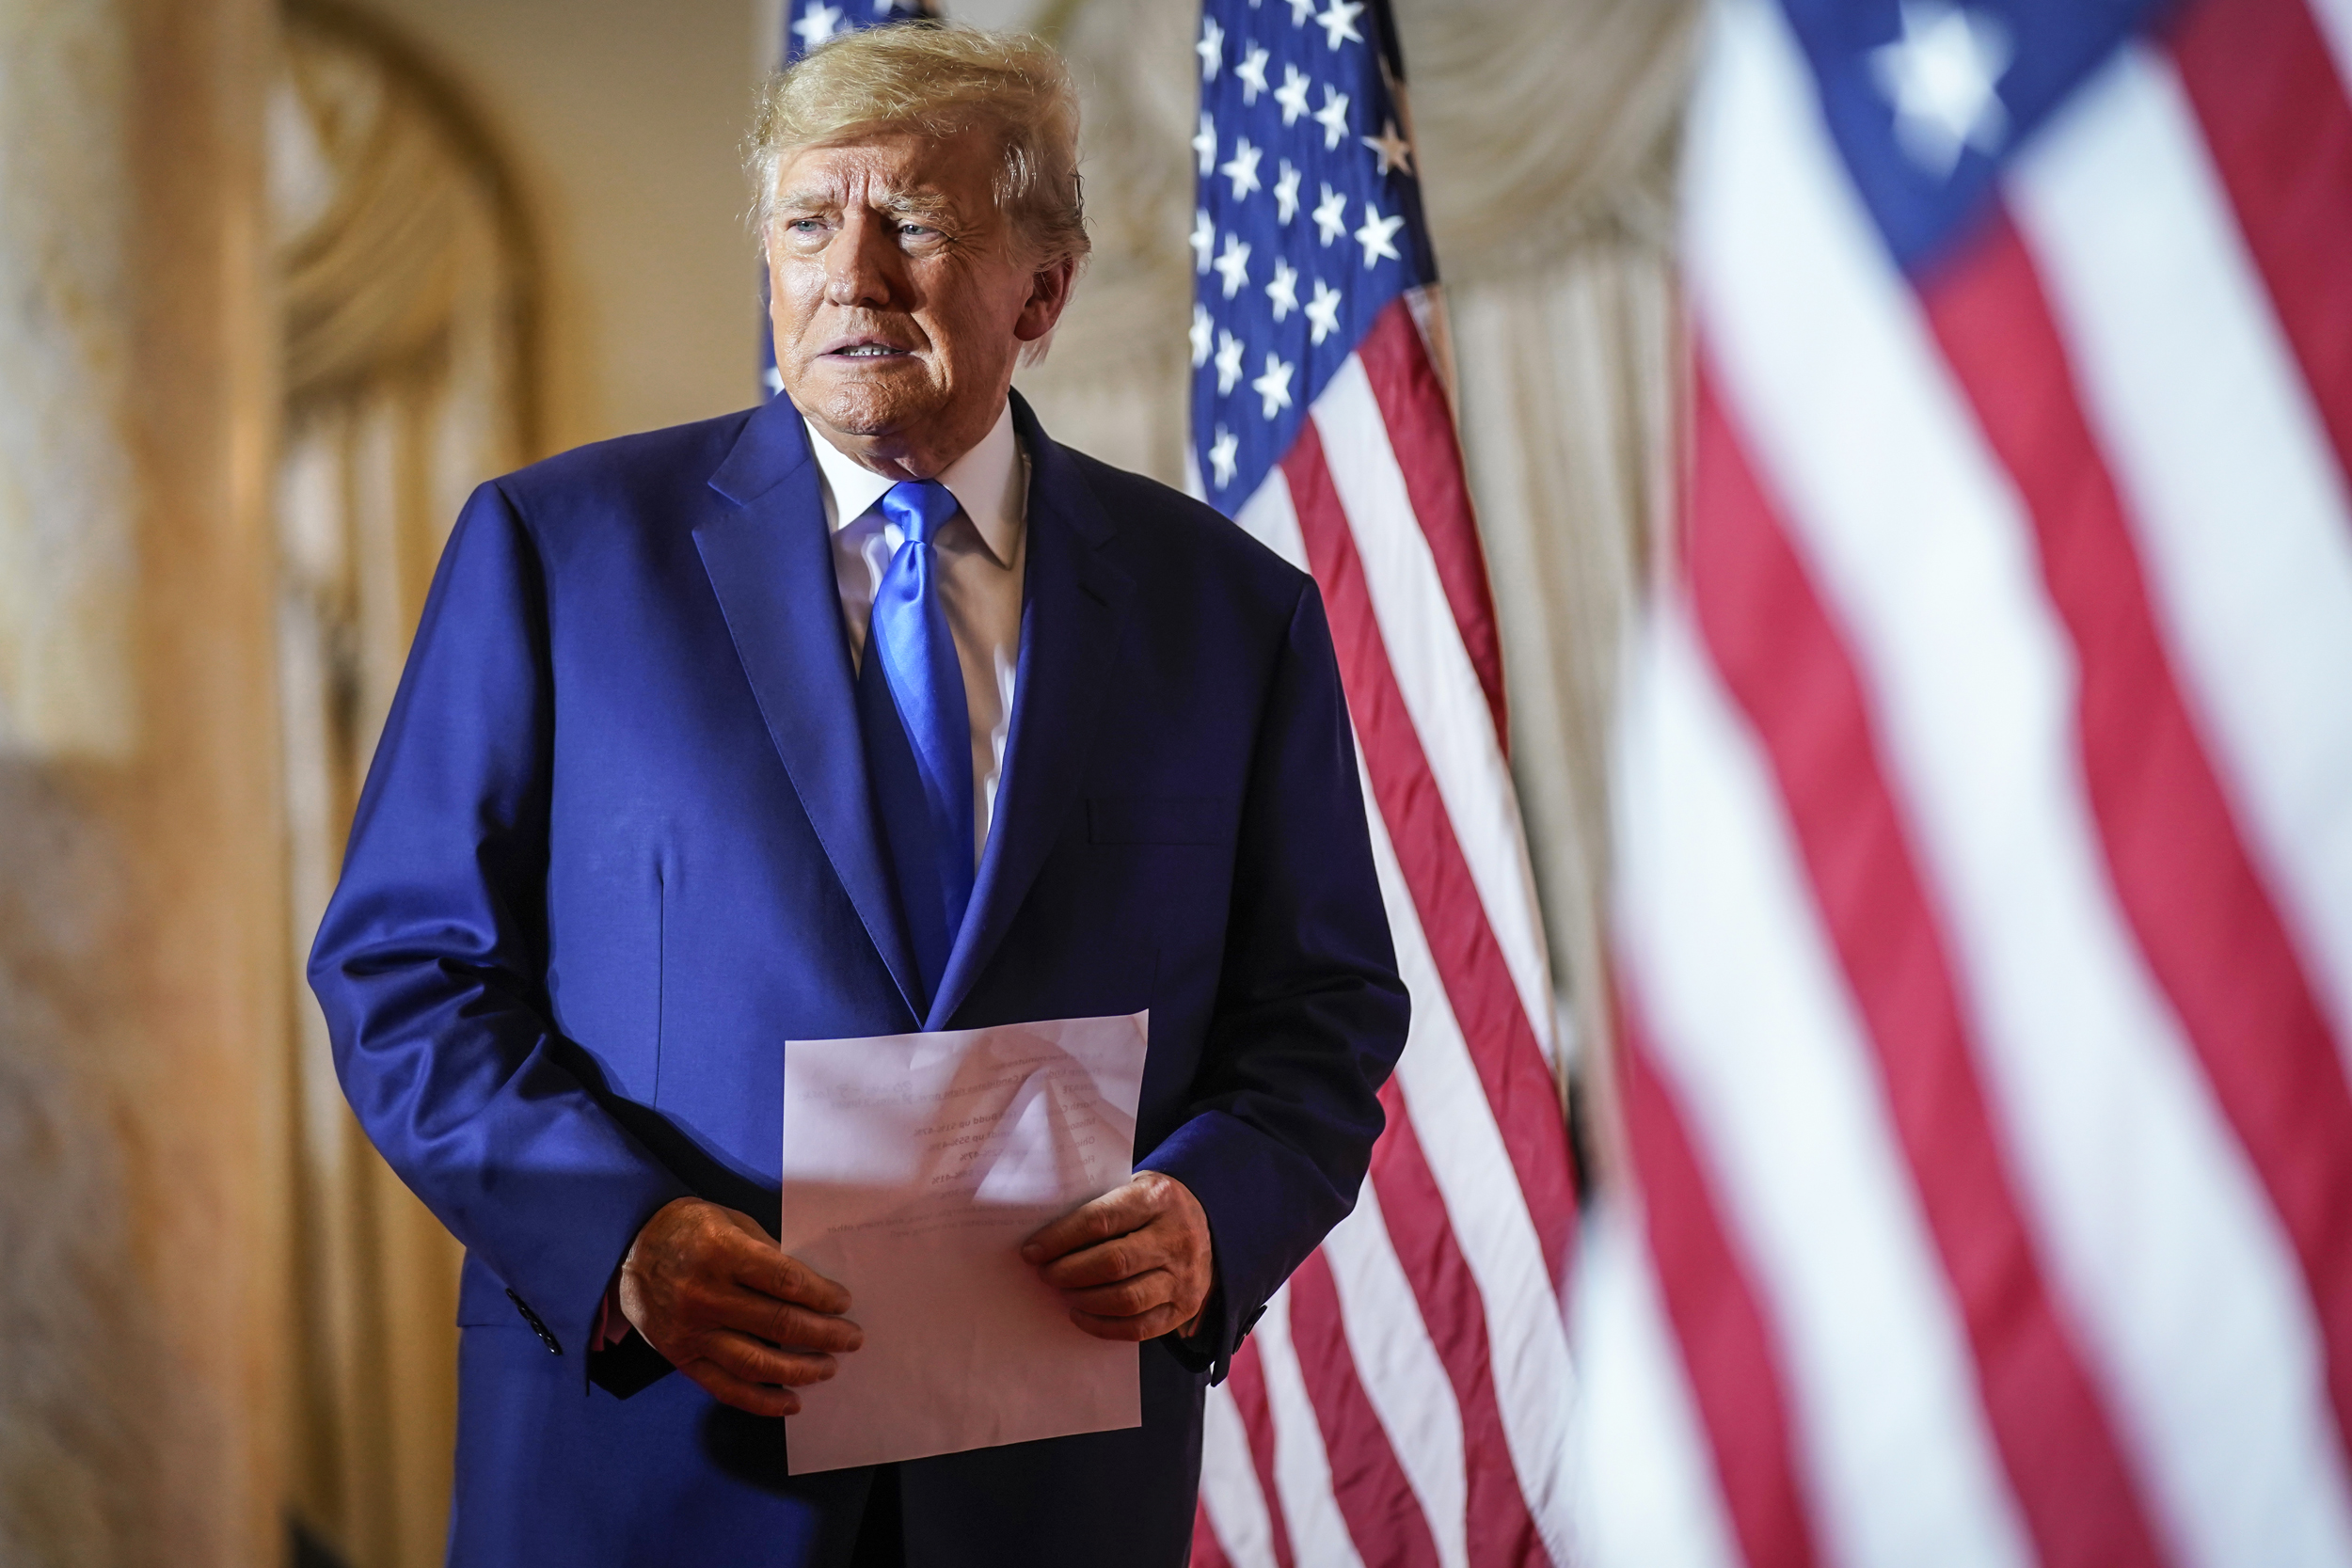 After years of legal battle, the Democrats released former United States (US) President Donald Trump’s tax returns from 2015 to 2020.